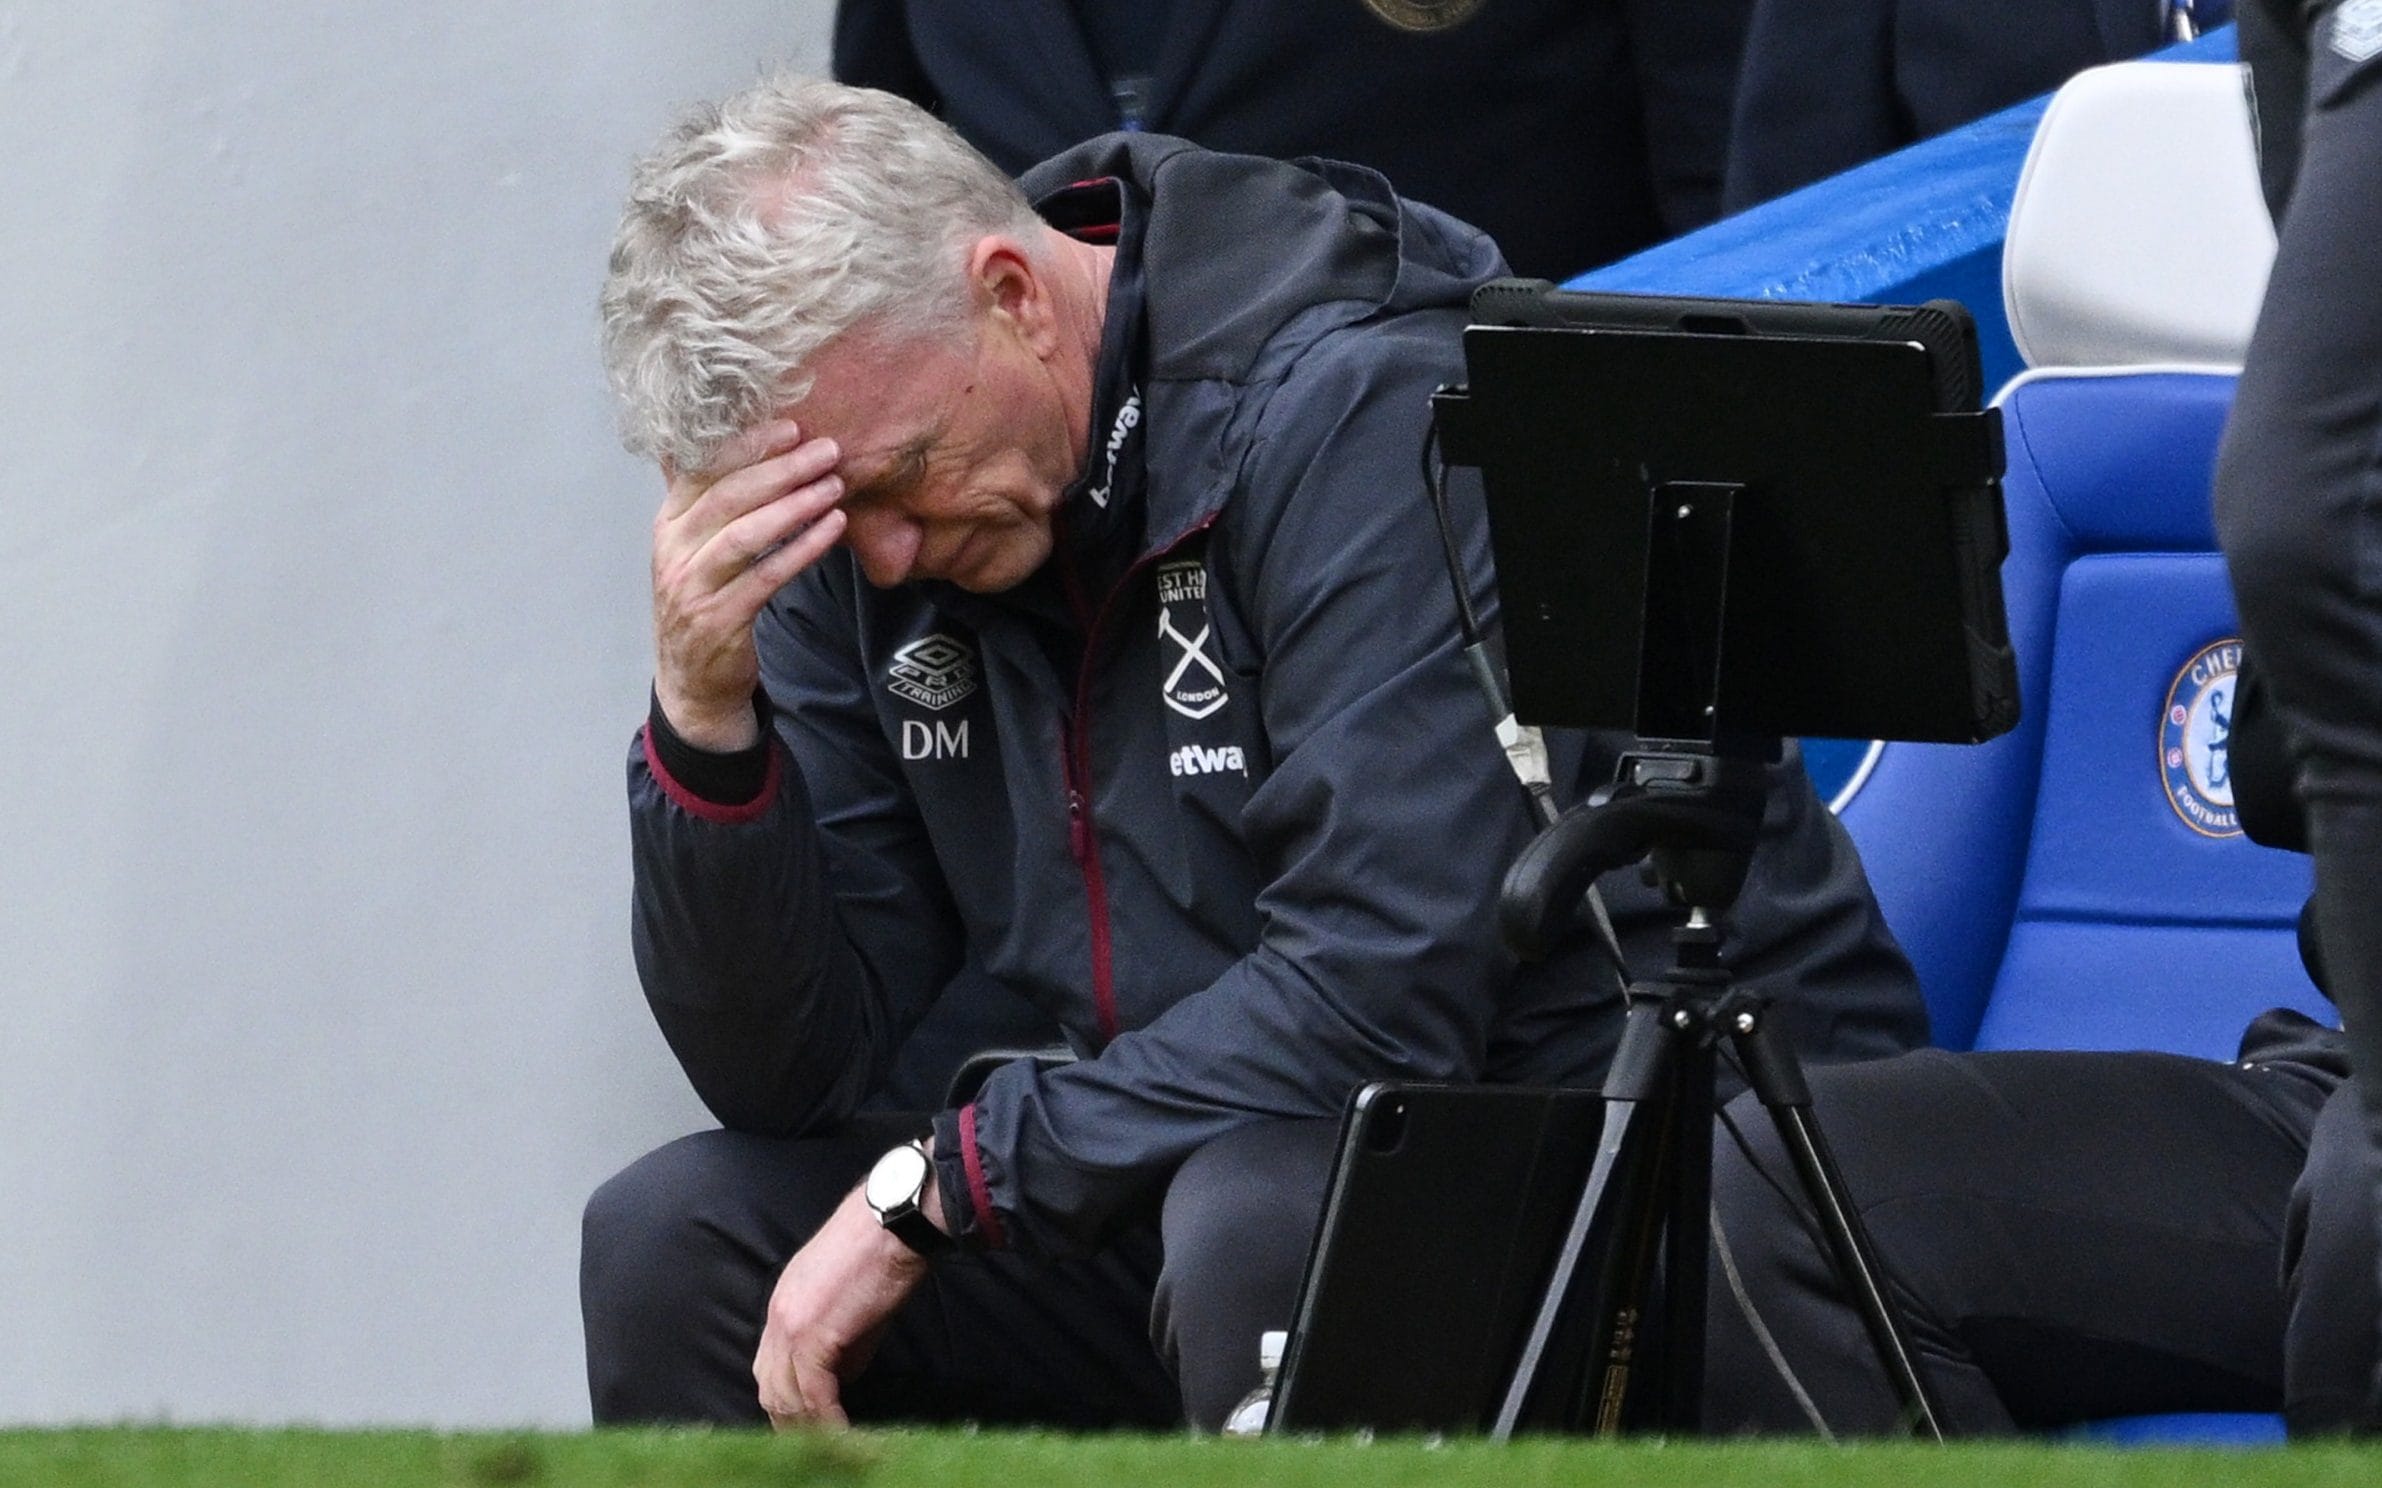 david moyes’ west ham farewell is turning ugly – he deserves better